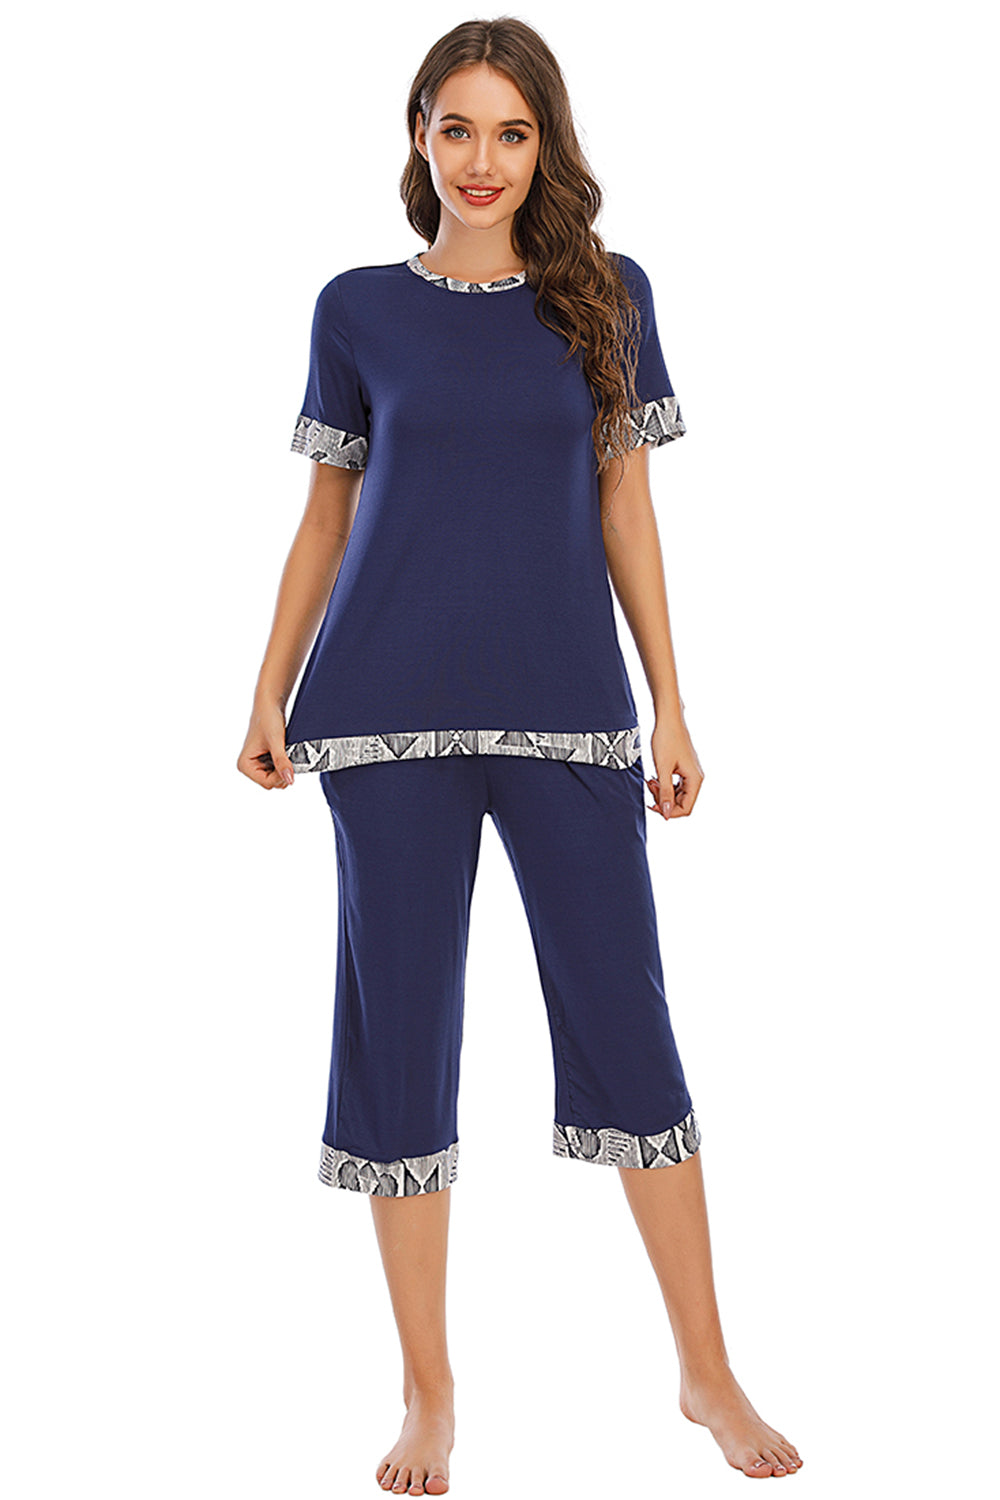 Round Neck Short Sleeve Top and Capris Pants Lounge Set